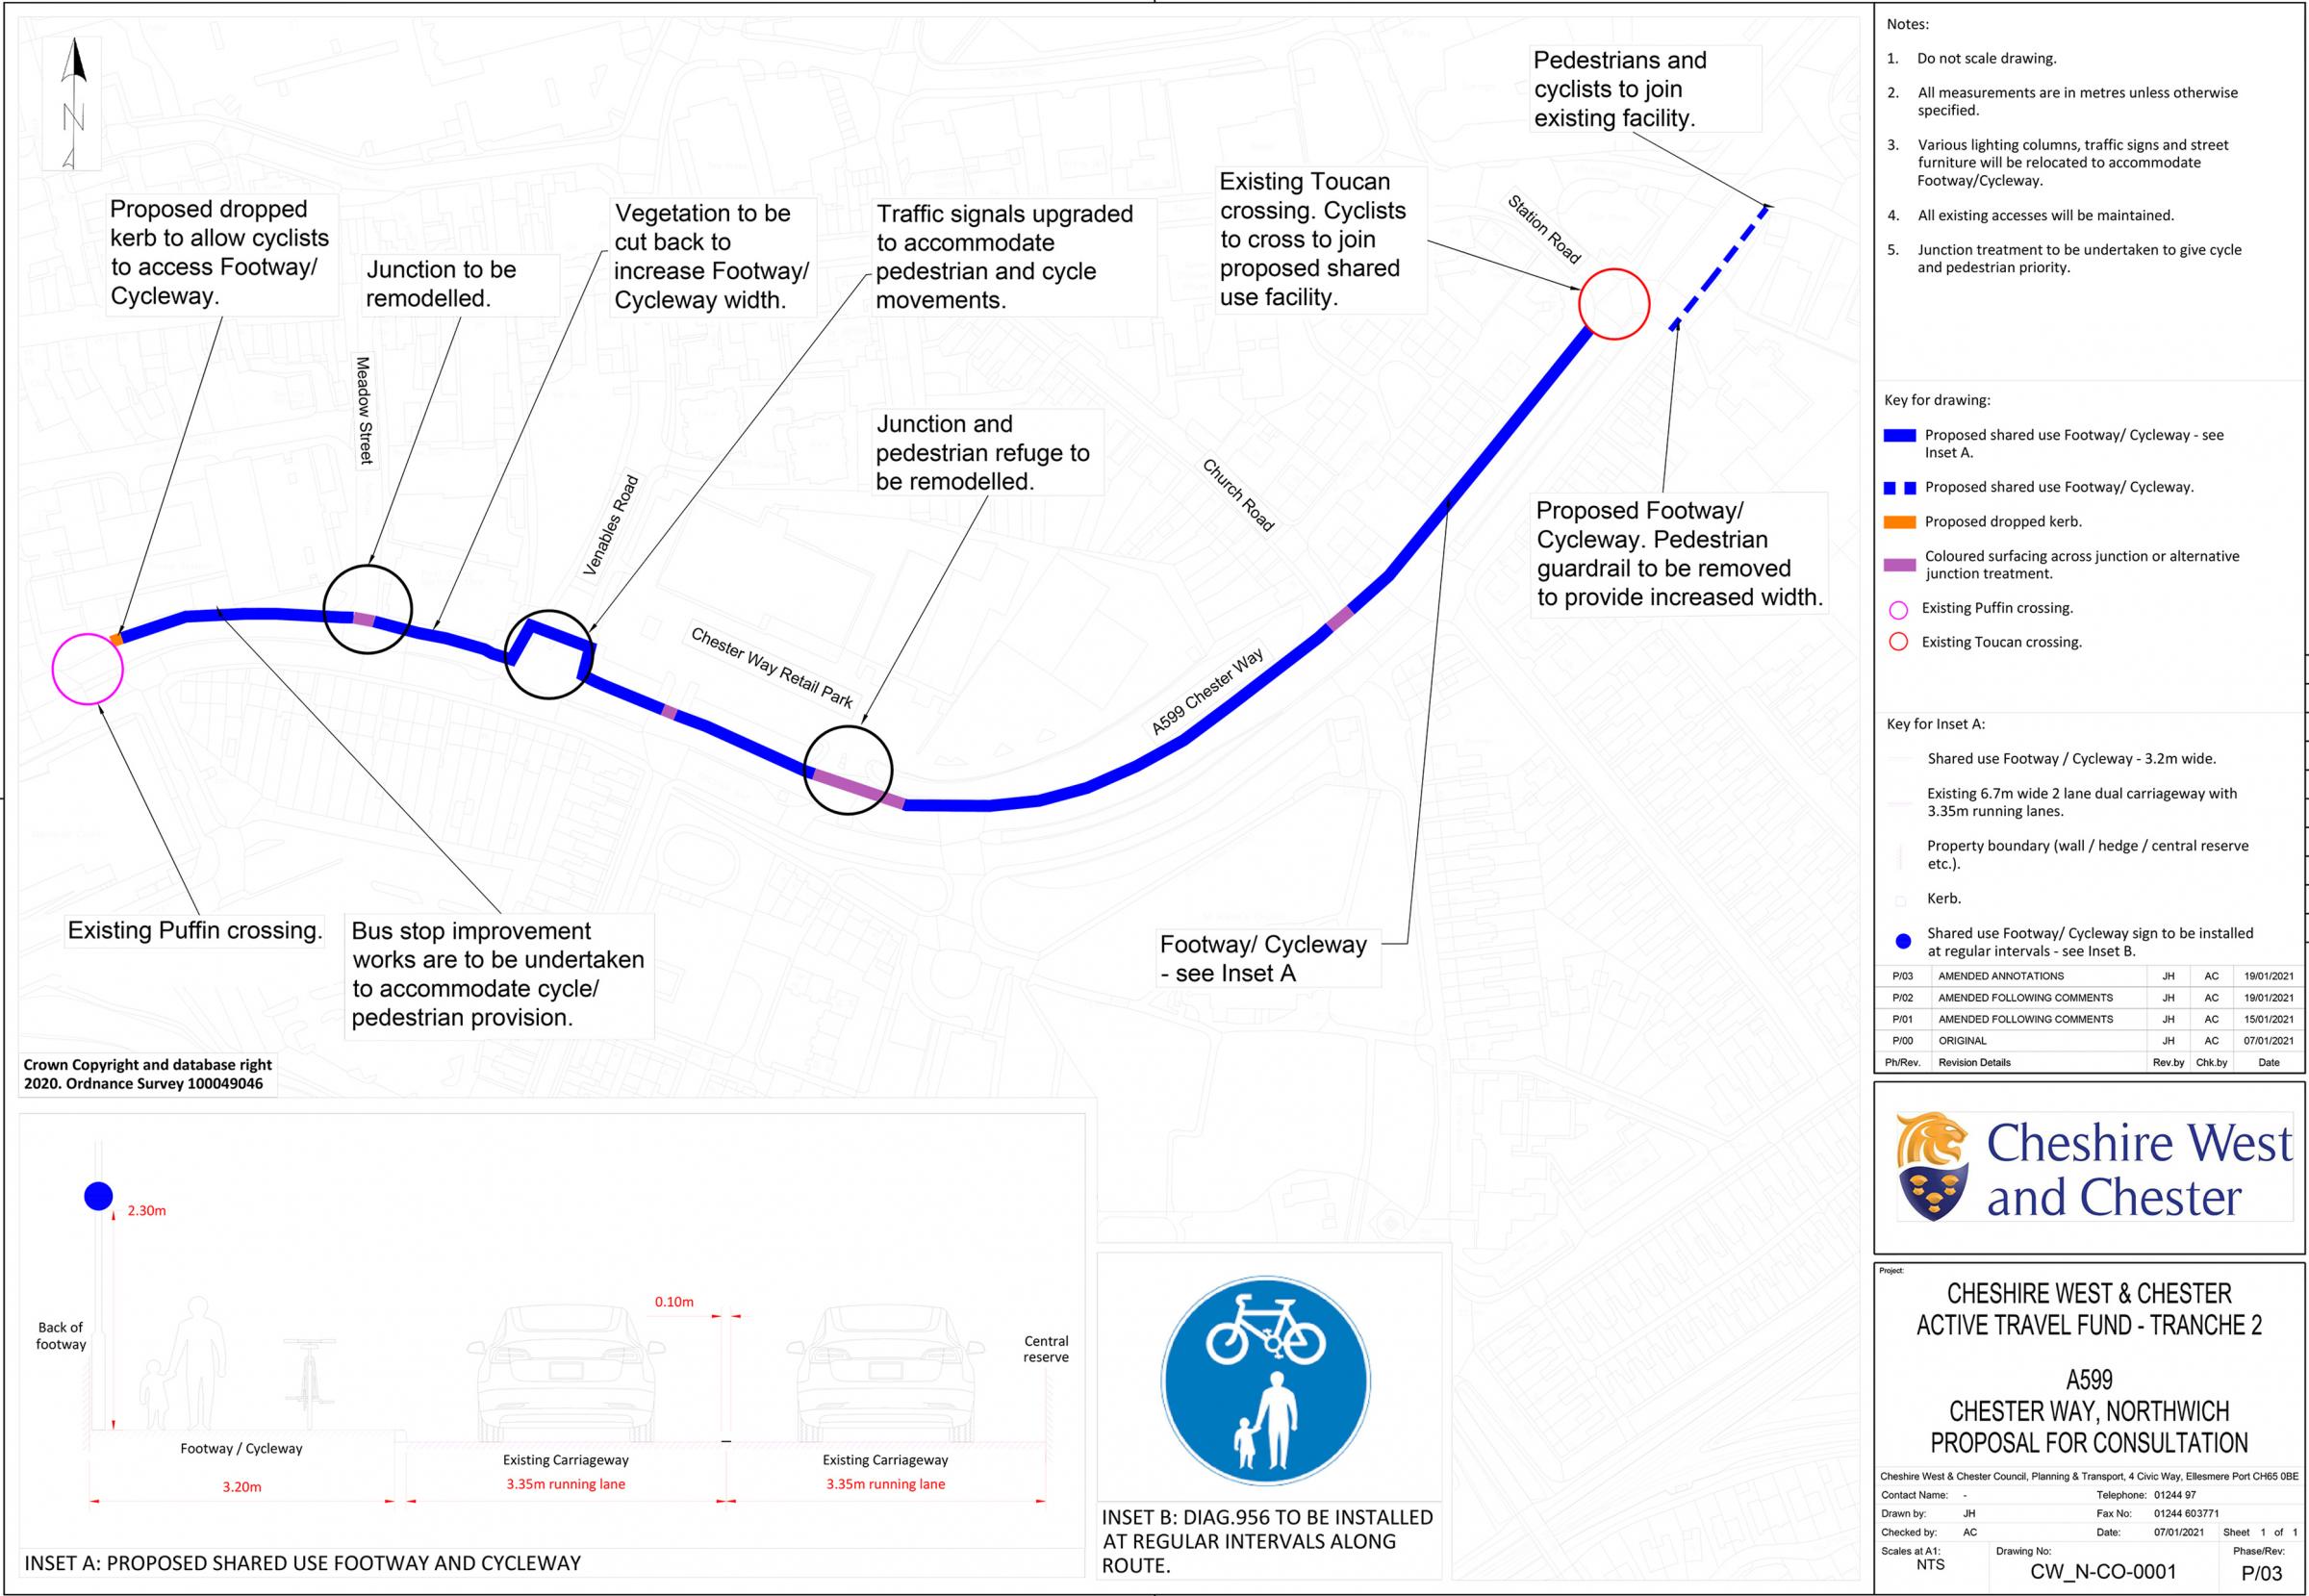 CWACs plans for the Chesterway cycling route